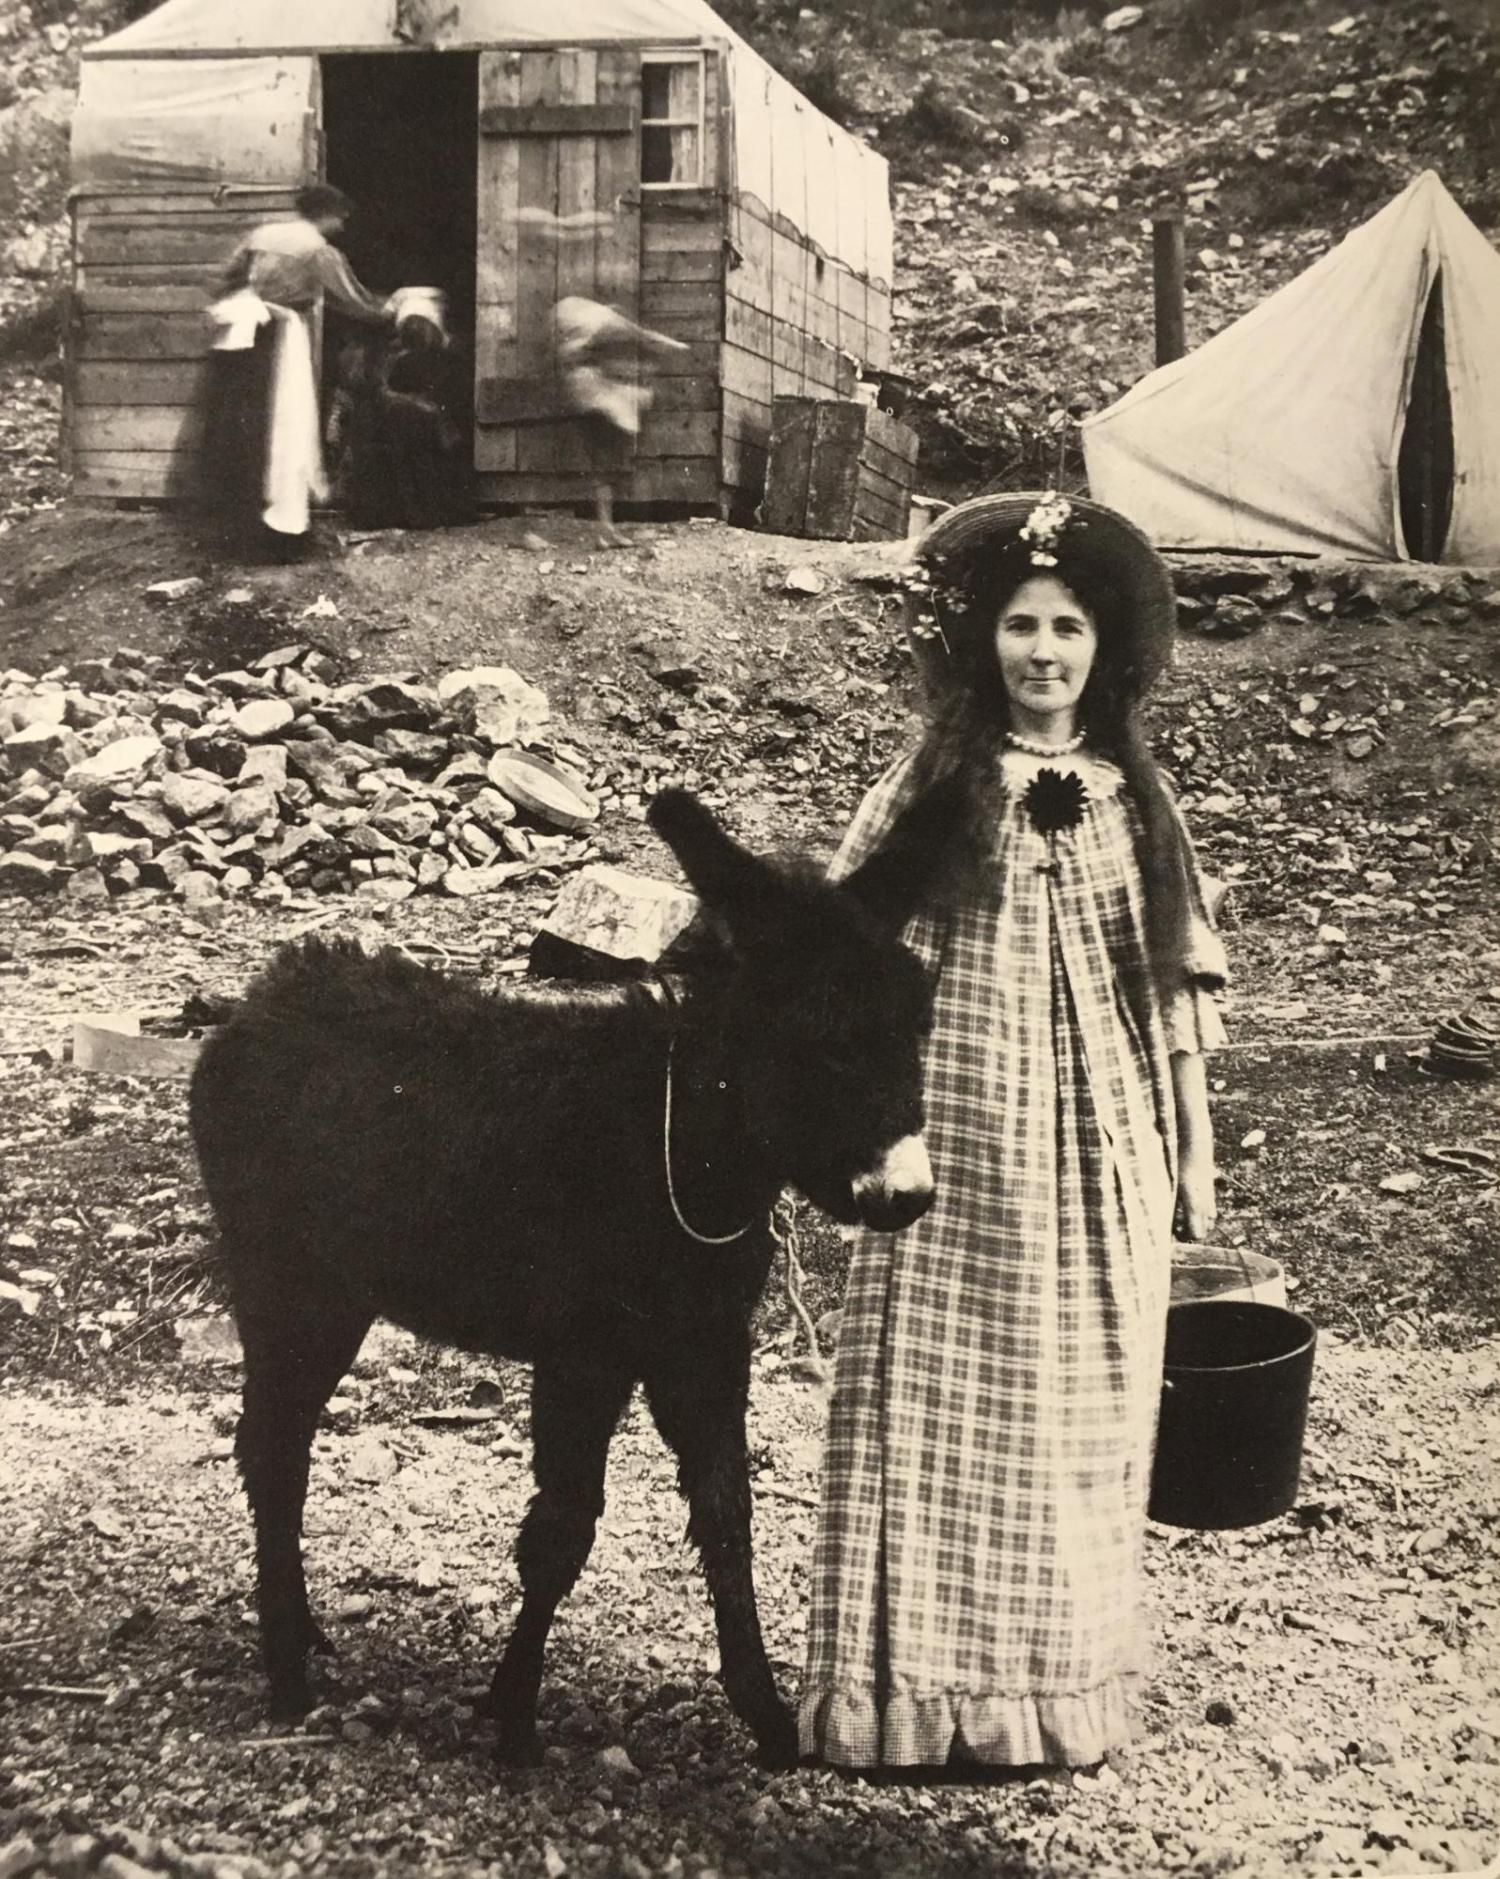 Lachlan McLean photograph of a pioneer woman with a burro in 19th century Clear Creek County